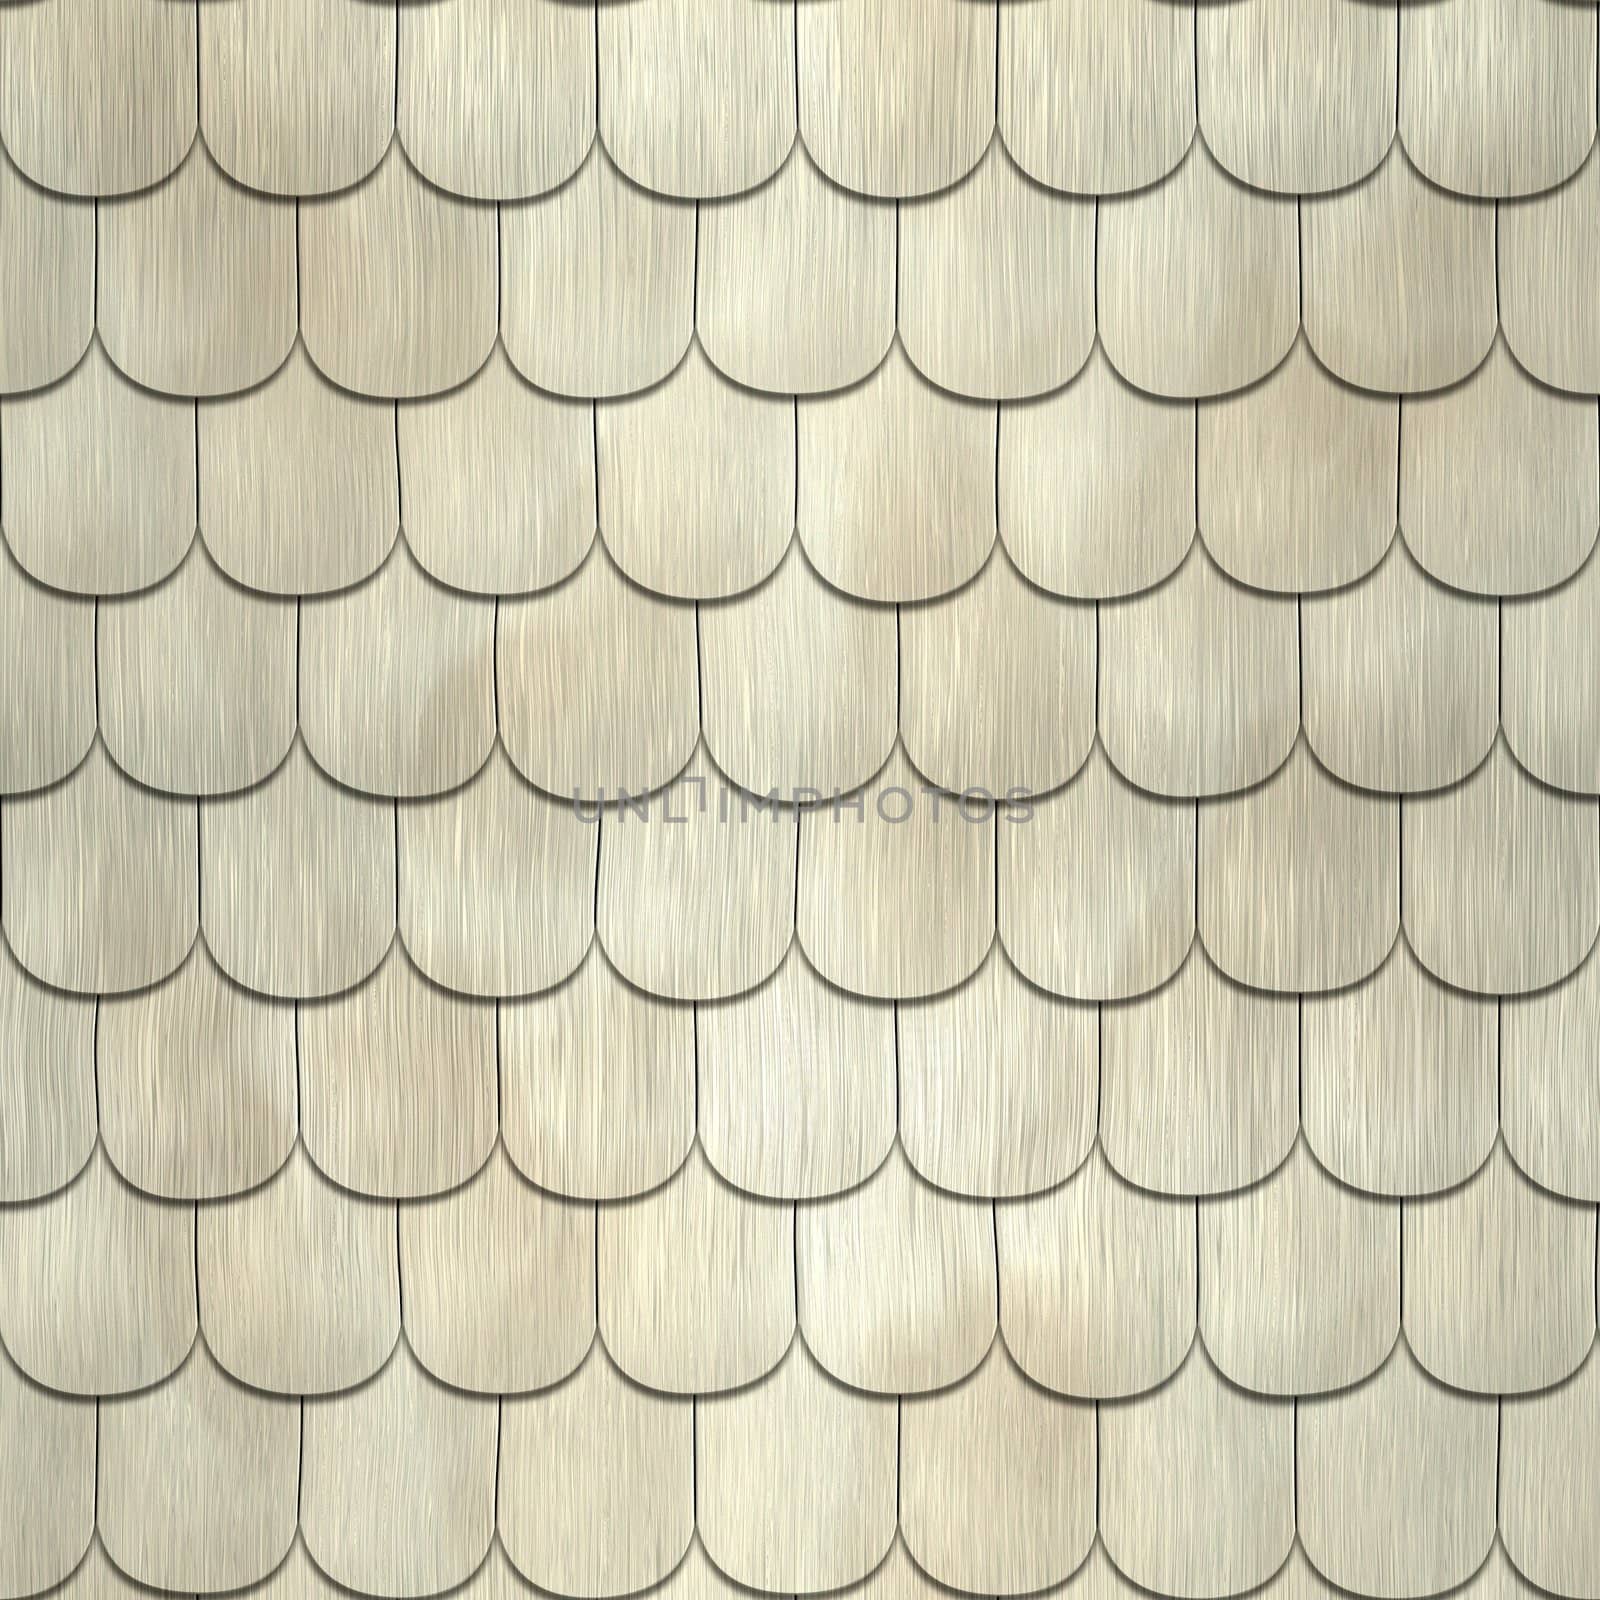 aluminium tile texture,  suits for duplication of the background, illustration